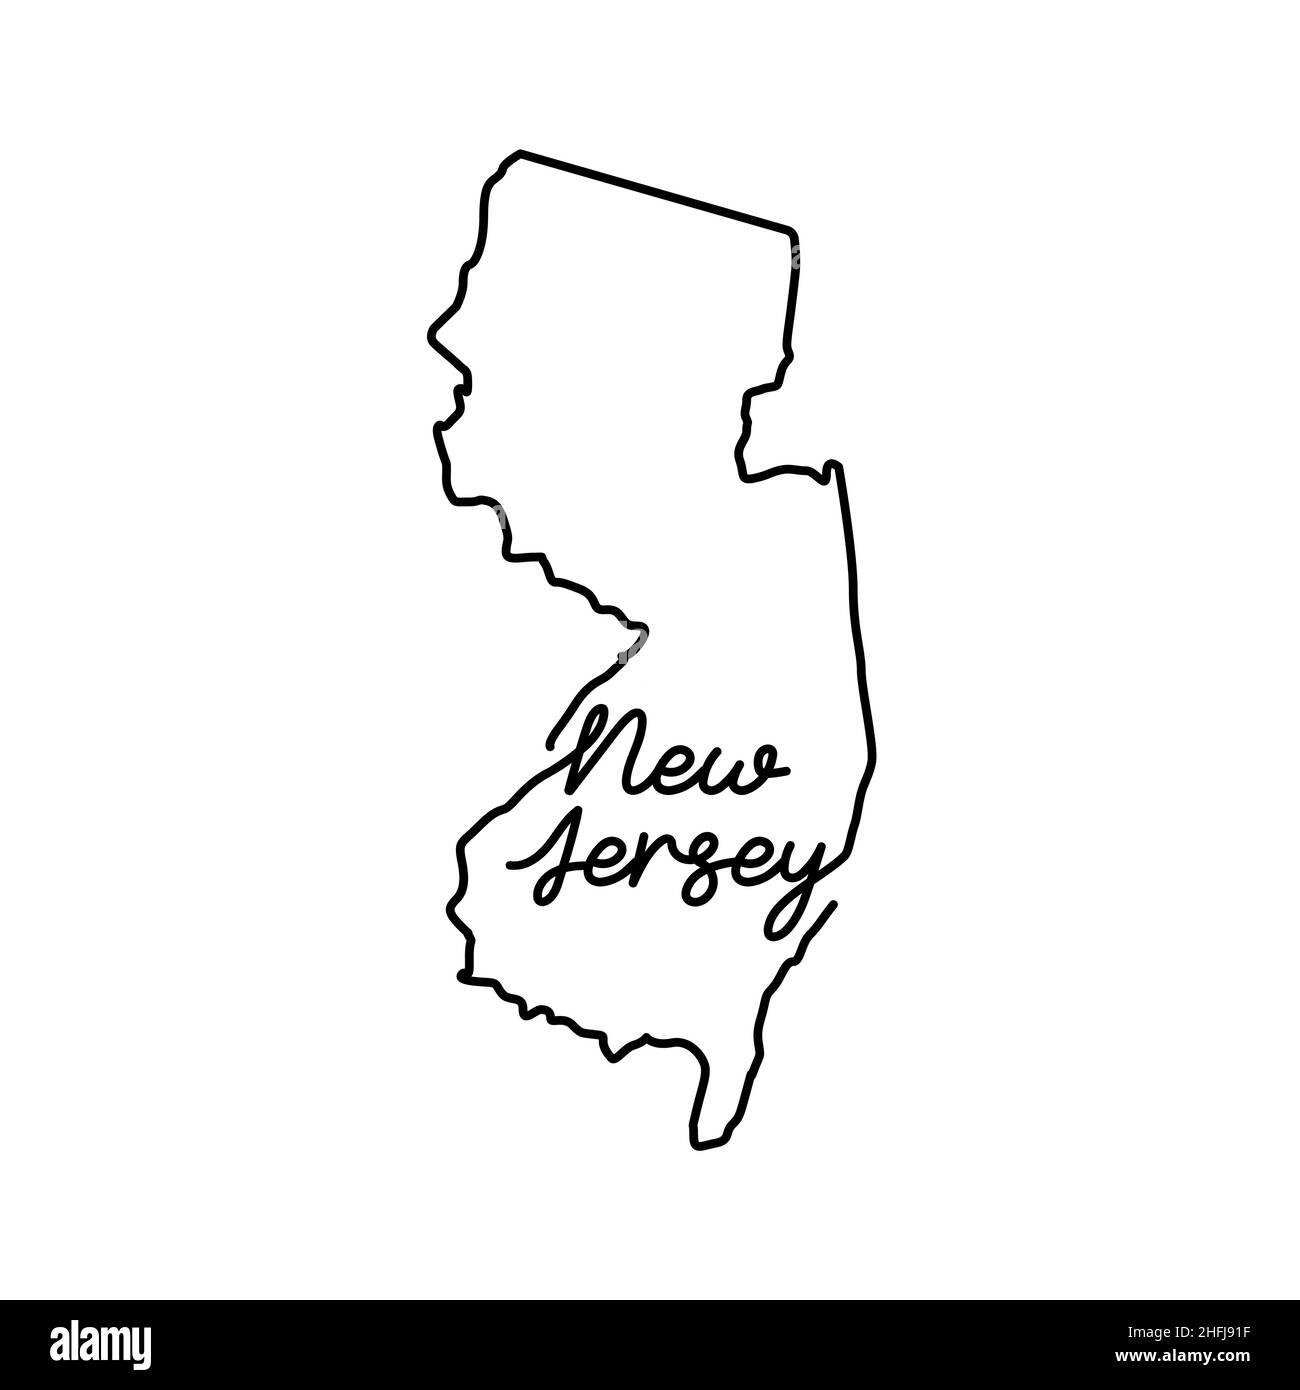 New Jersey US state outline map with the handwritten state name